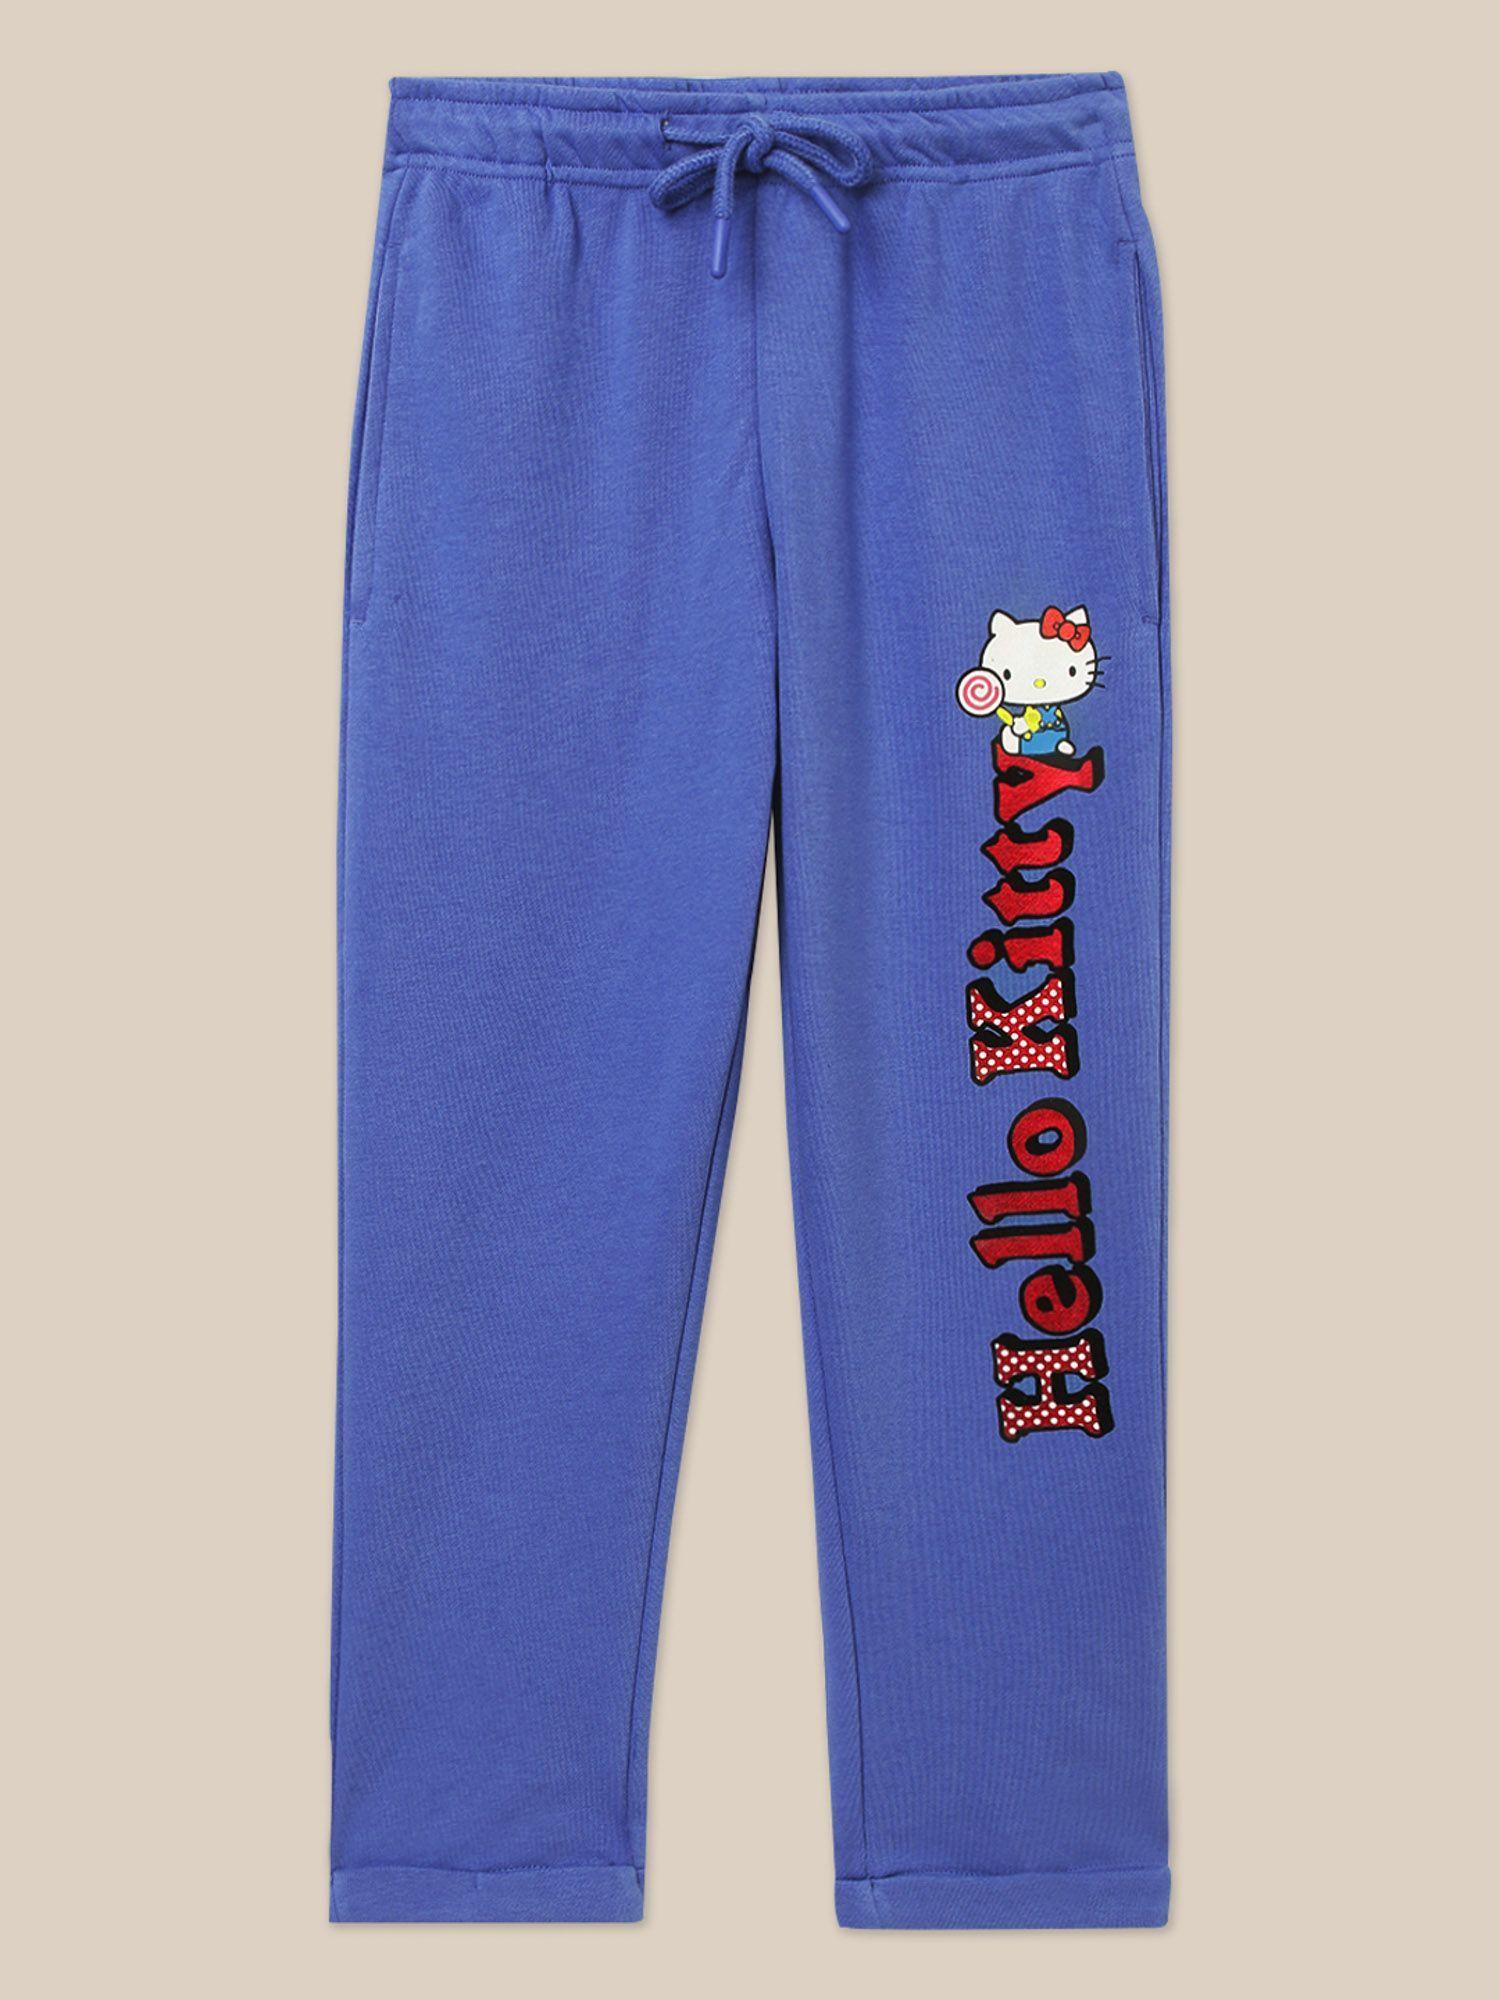 hello kitty printed blue trousers for girls